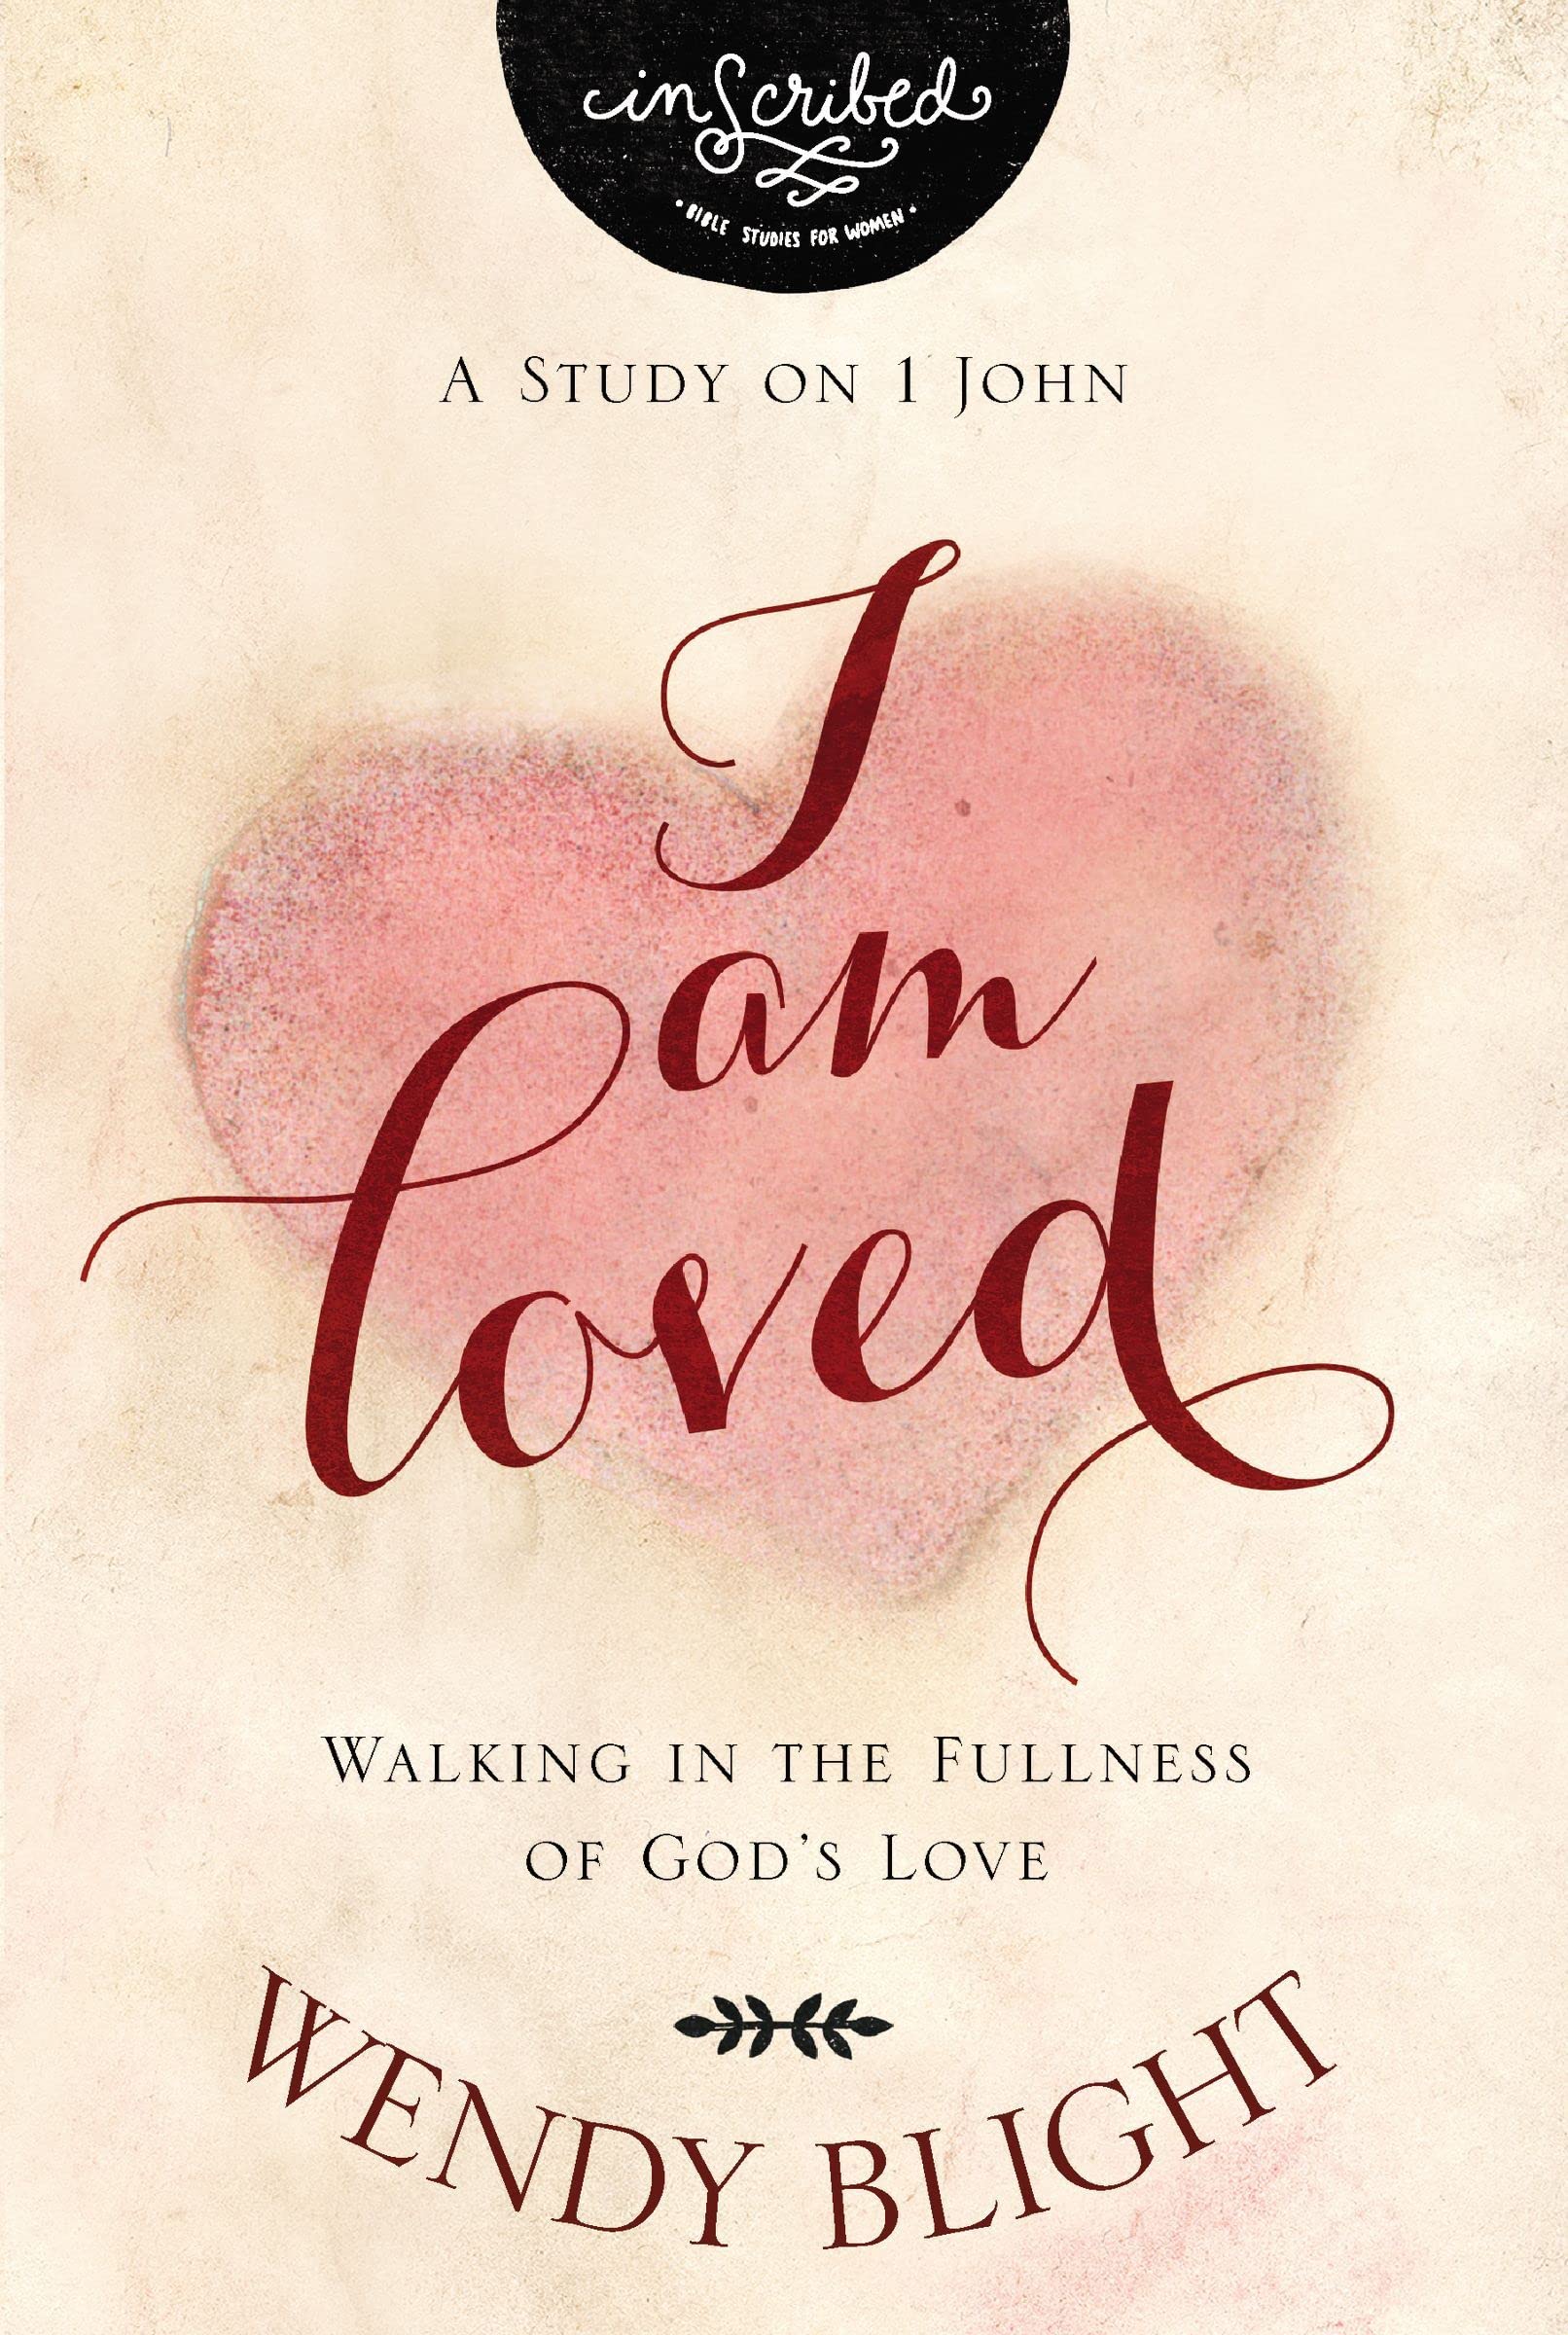 I Am Loved: Walking in the Fullness of God’s Love (InScribed Collection)